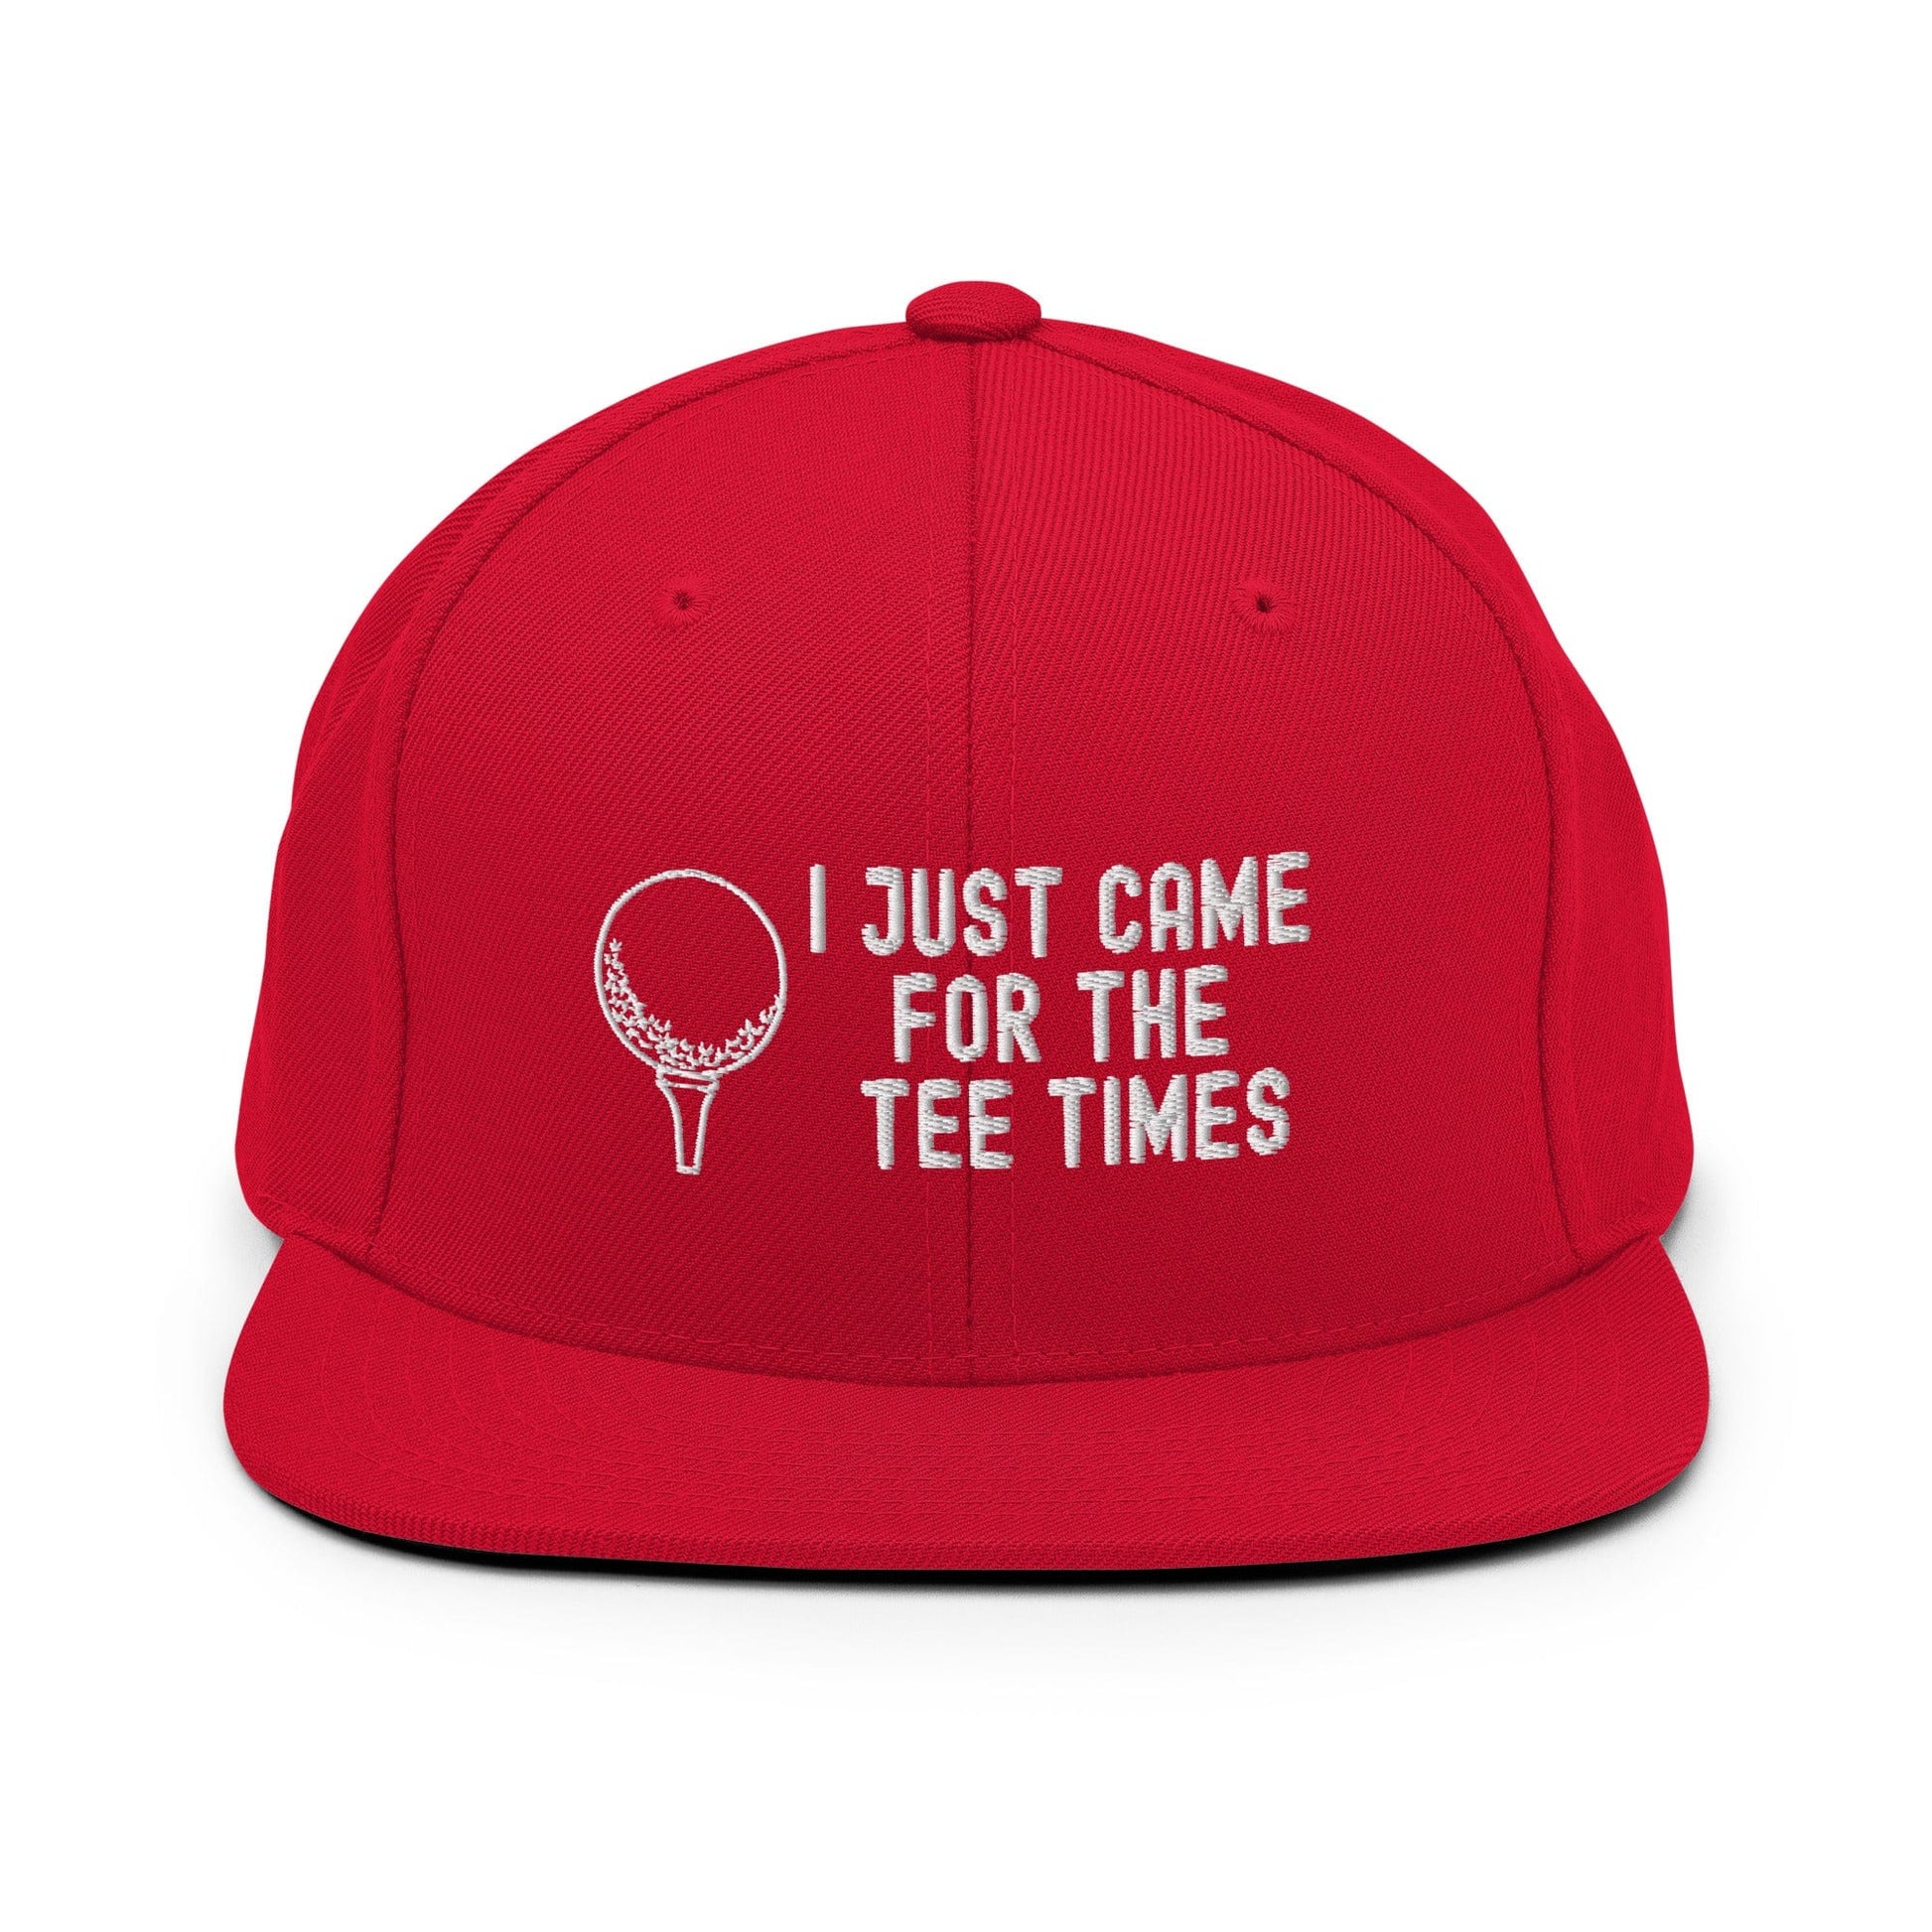 Funny Golfer Gifts  Snapback Hat Red I Just Came For The Tee Times Snapback Hat